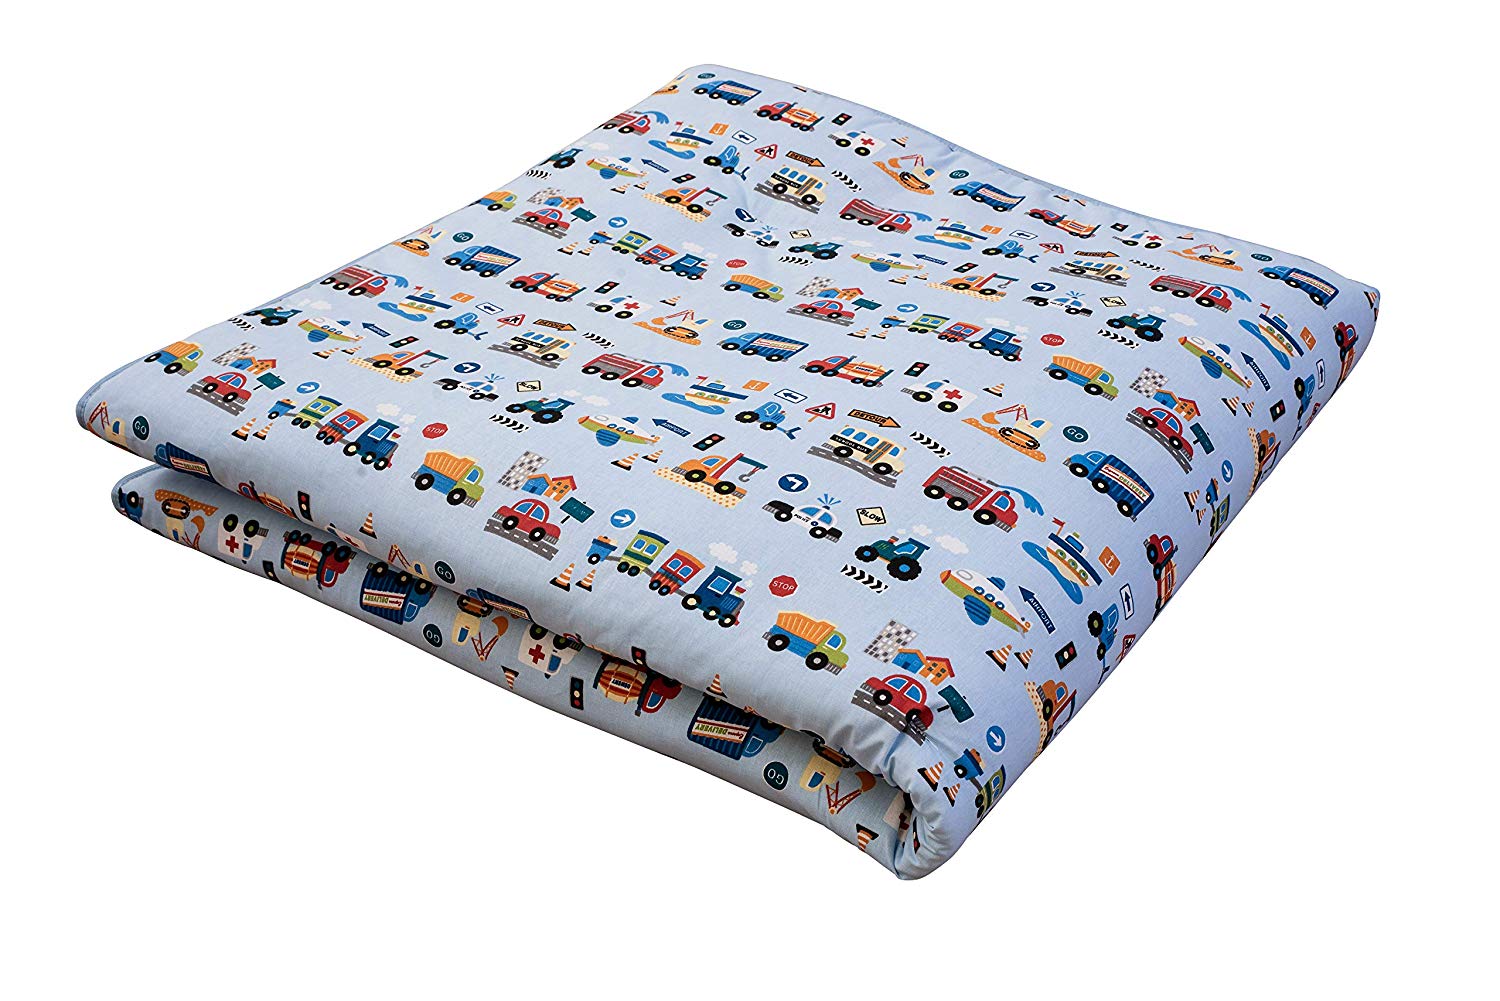 Ideenreich 2014 Size 1 Large Beautiful Crawling and Playing Blanket 135 x 190 cm 150x180 Cars